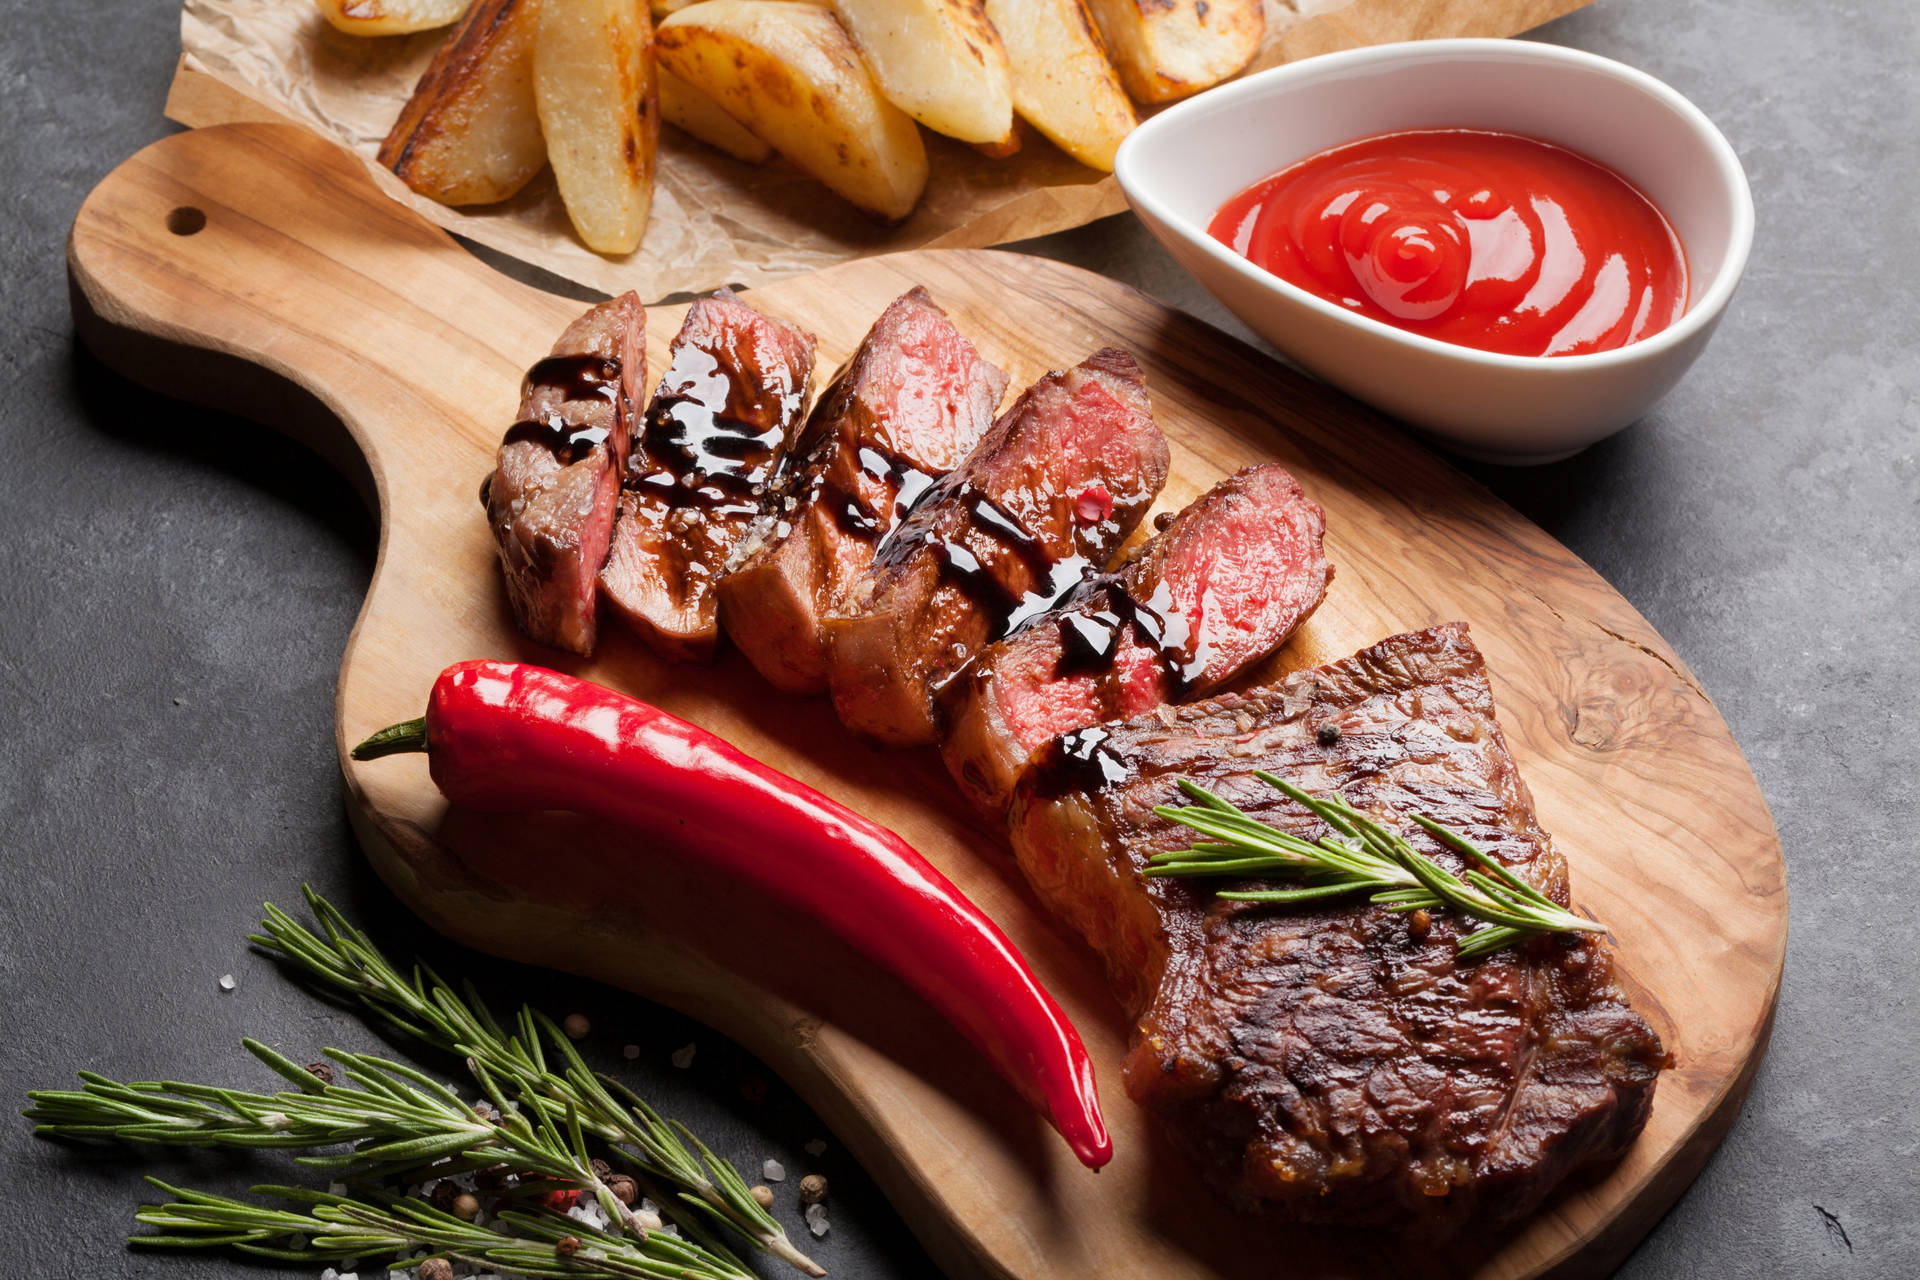 Caption: Fresh Grilled Meat Striploin With Spicy Chili Sauce Background